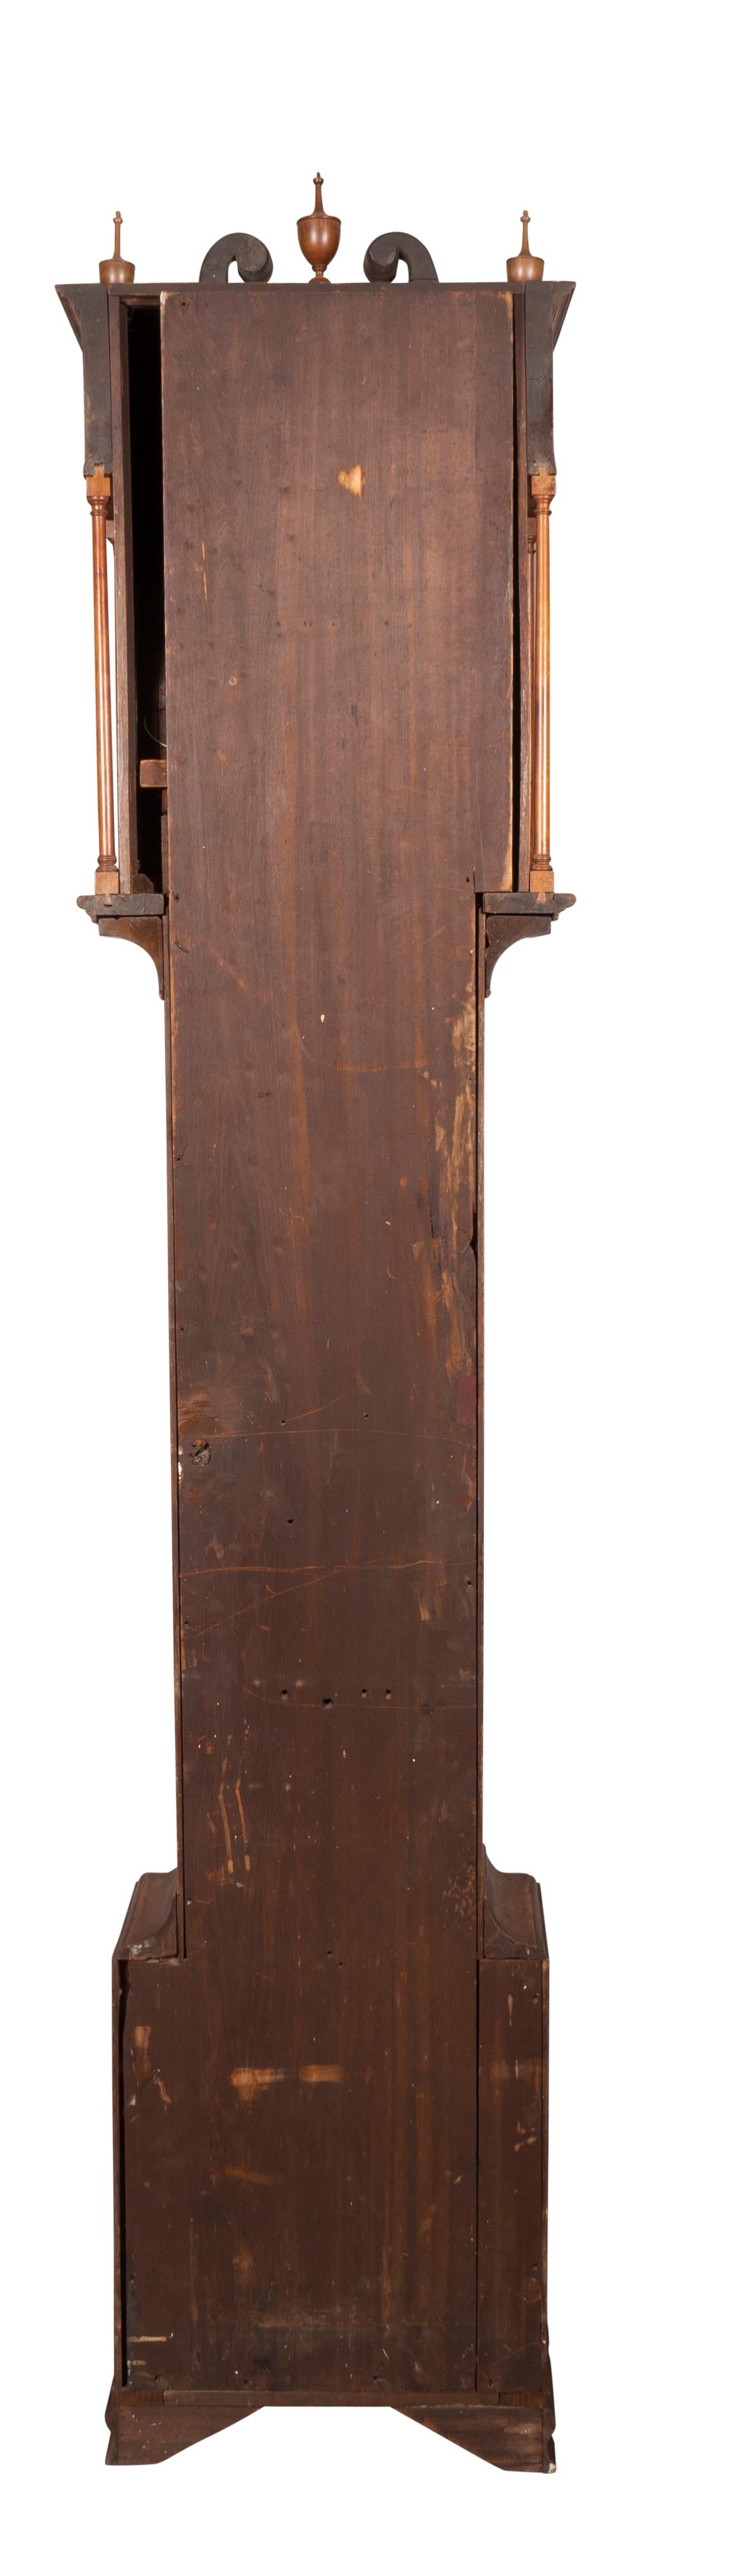 American Walnut Tall Case Clock by Solomon Gorgas In Good Condition For Sale In Essex, MA